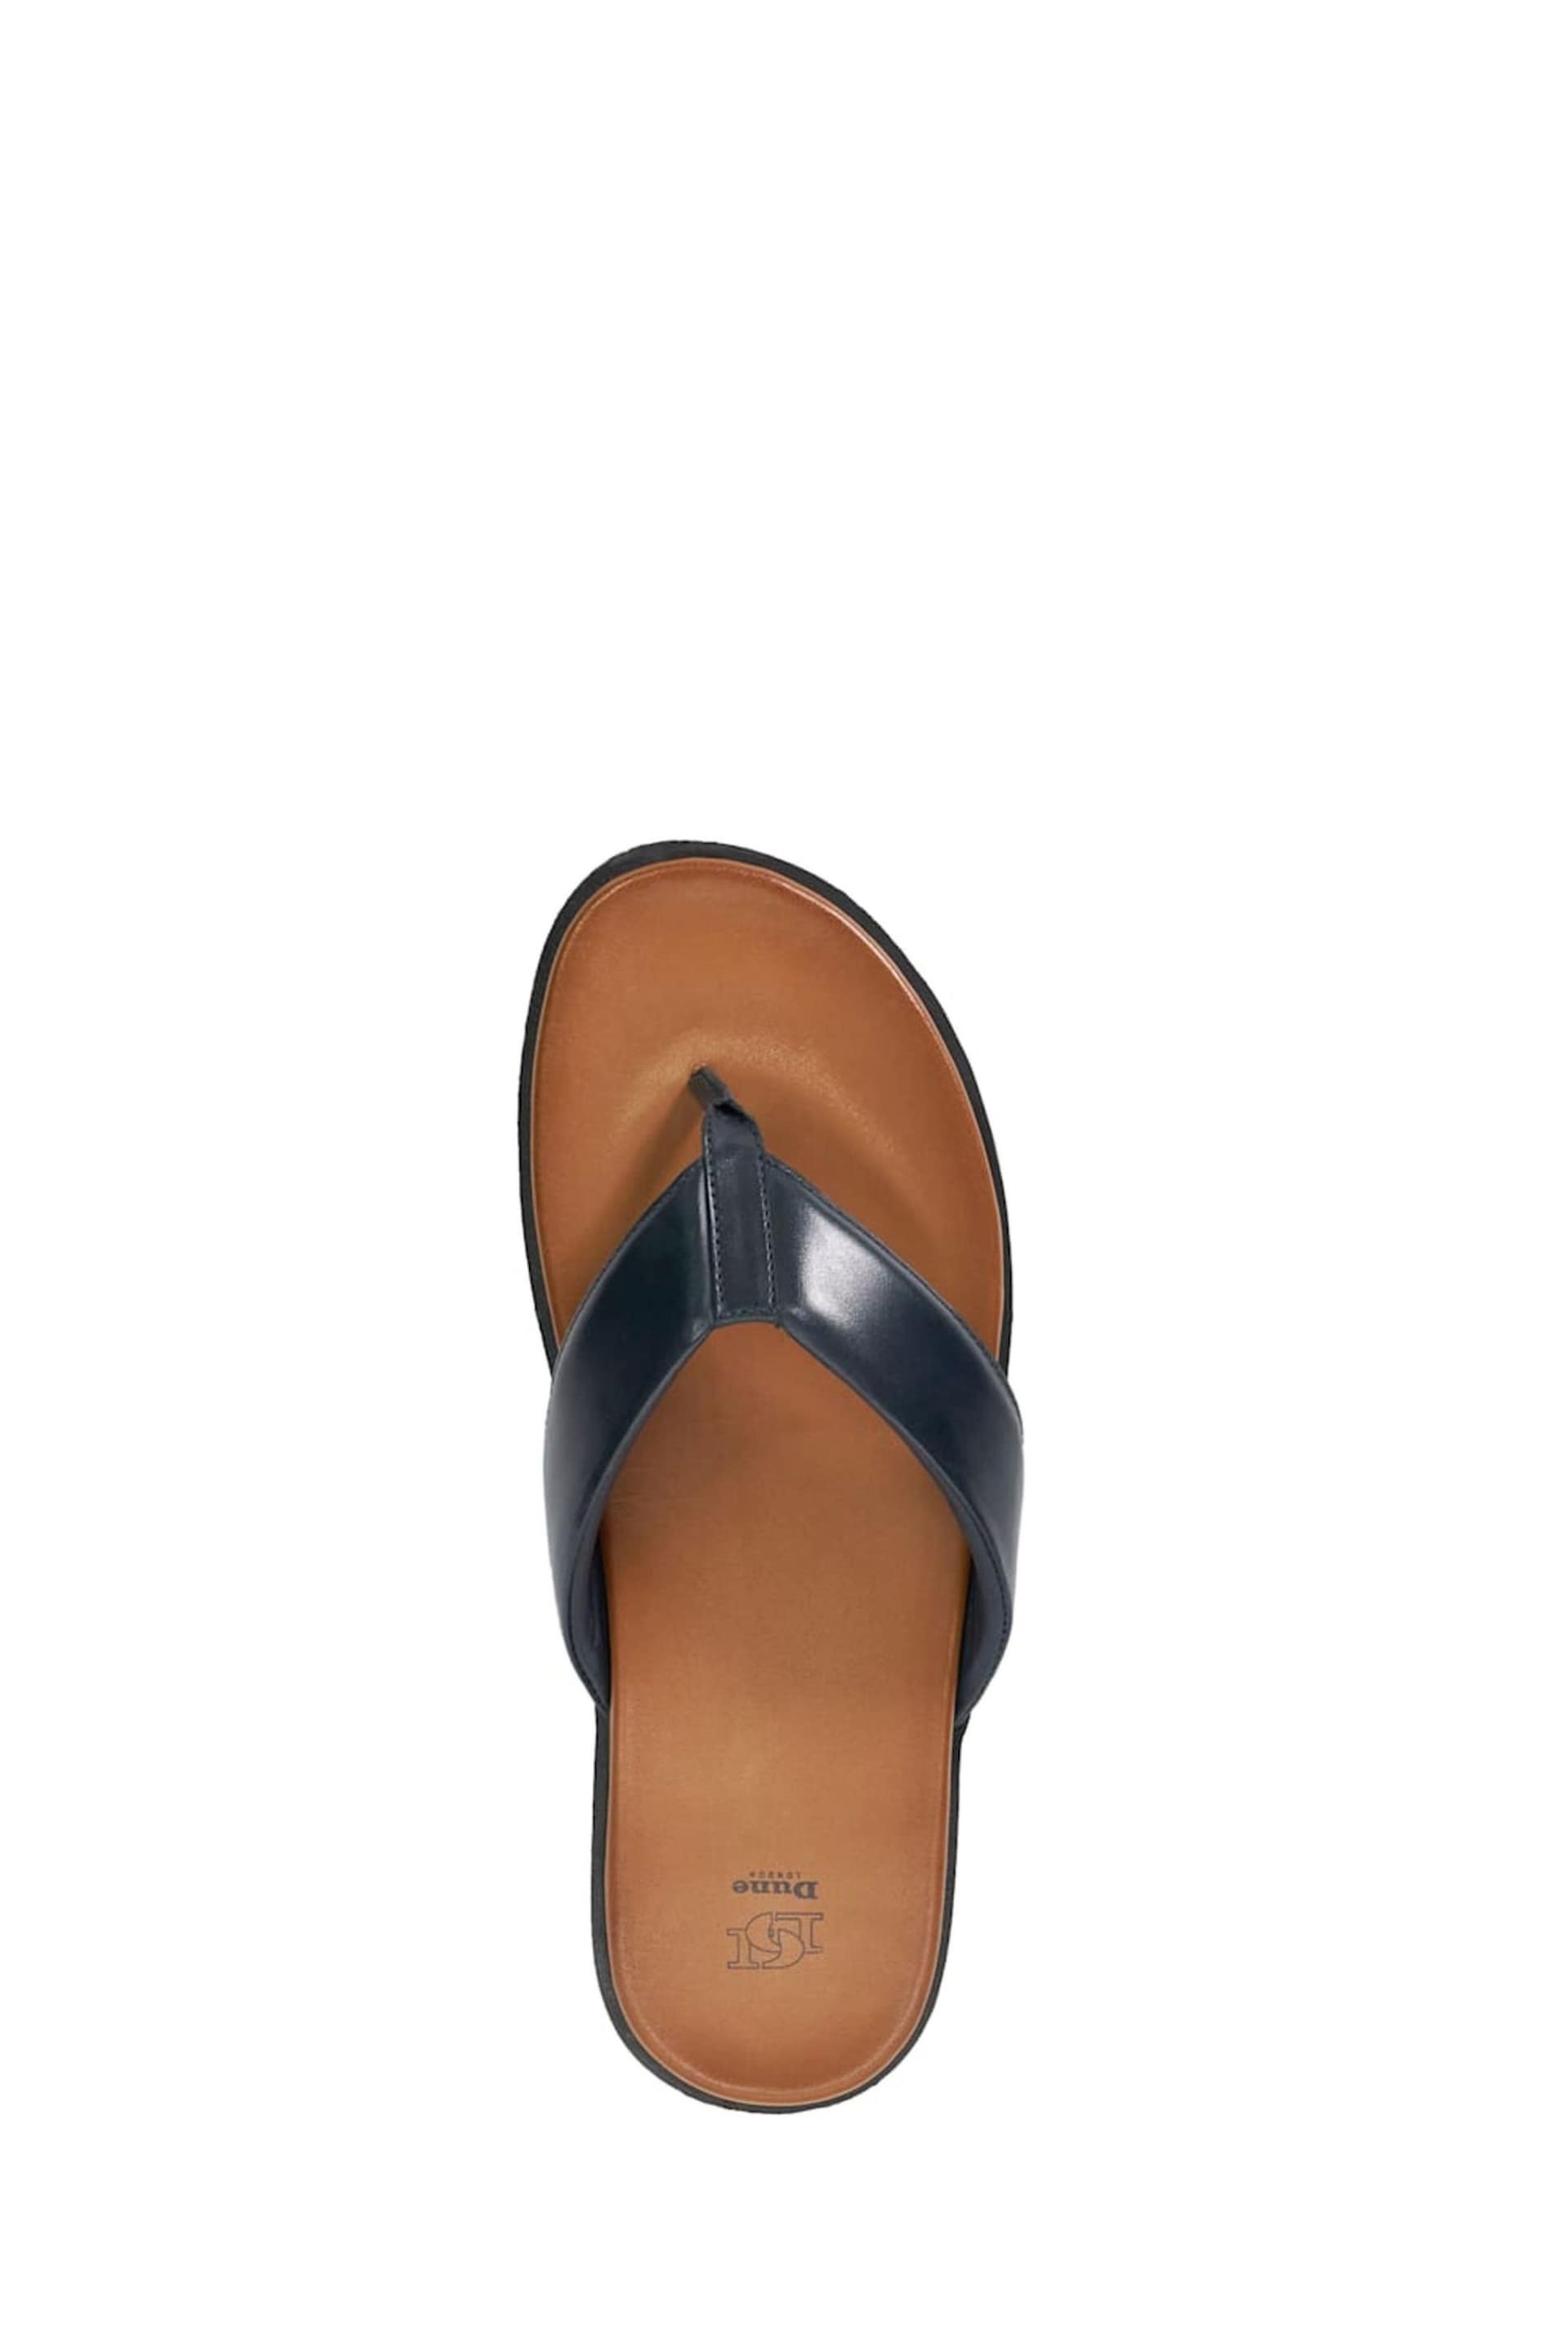 Dune London Blue Inspires Toe Post Leather Sandals - Image 5 of 7